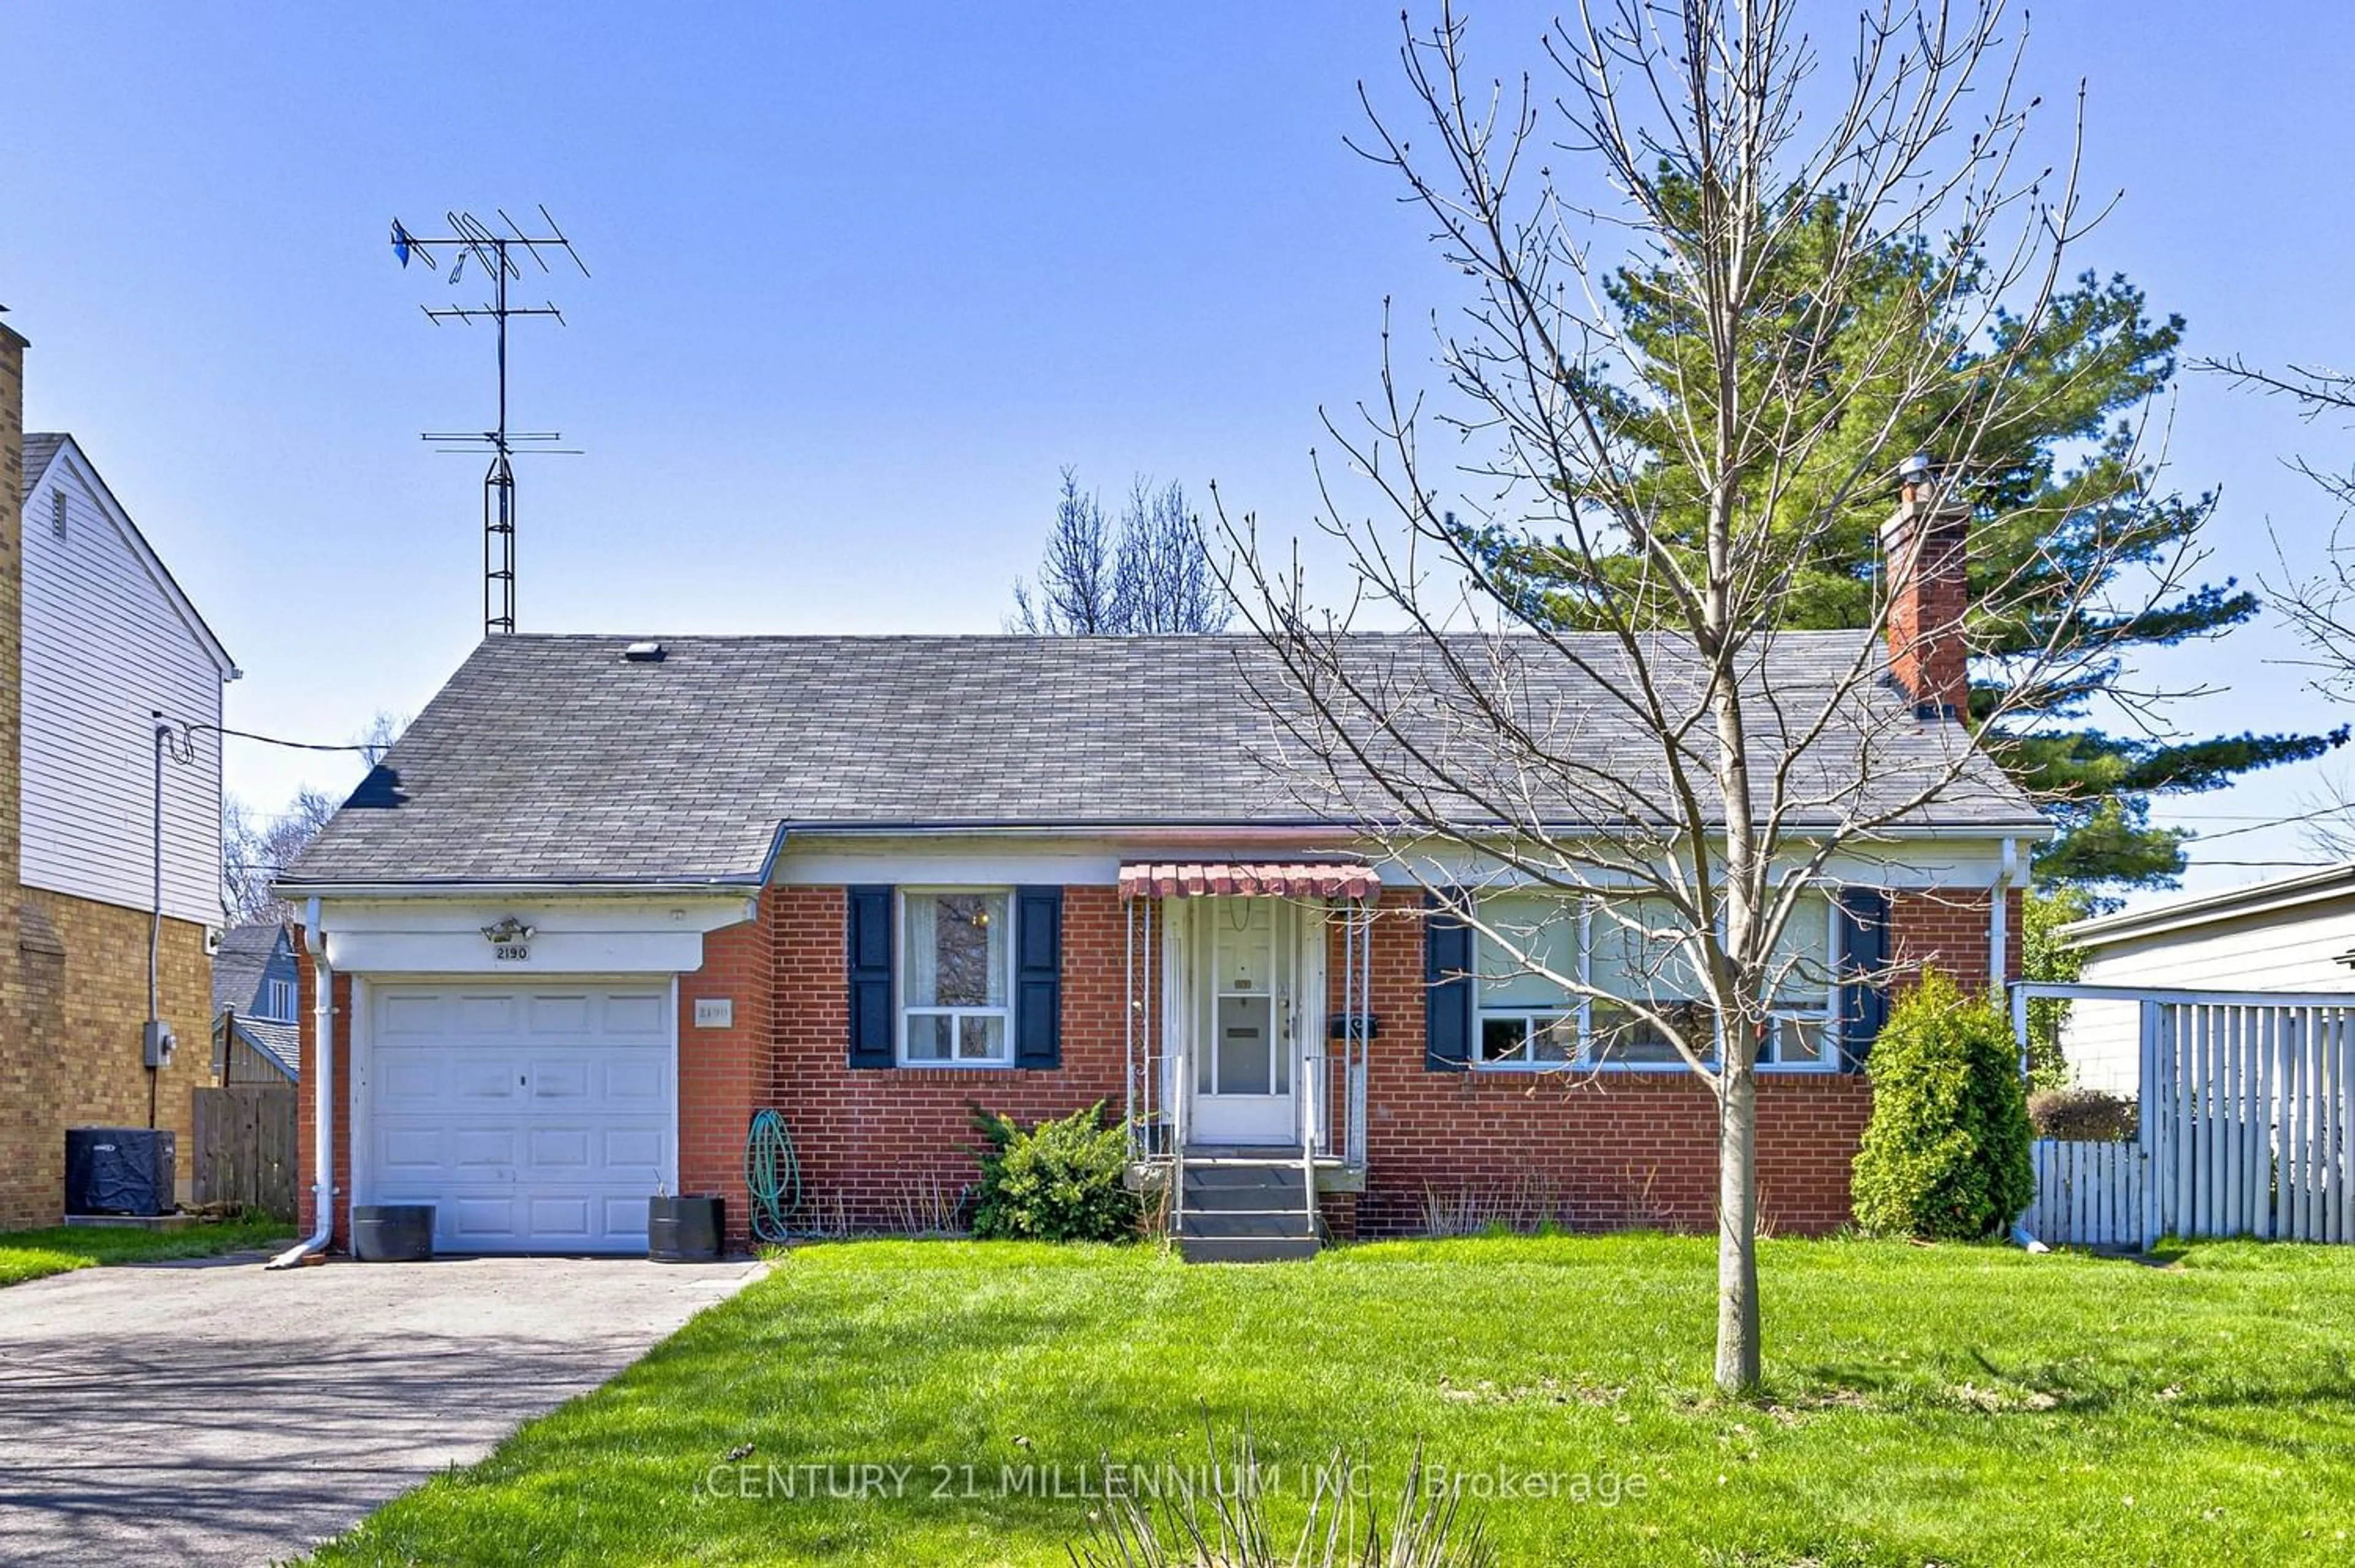 Home with brick exterior material for 2190 Breezy Brae Dr, Mississauga Ontario L4Y 1N5